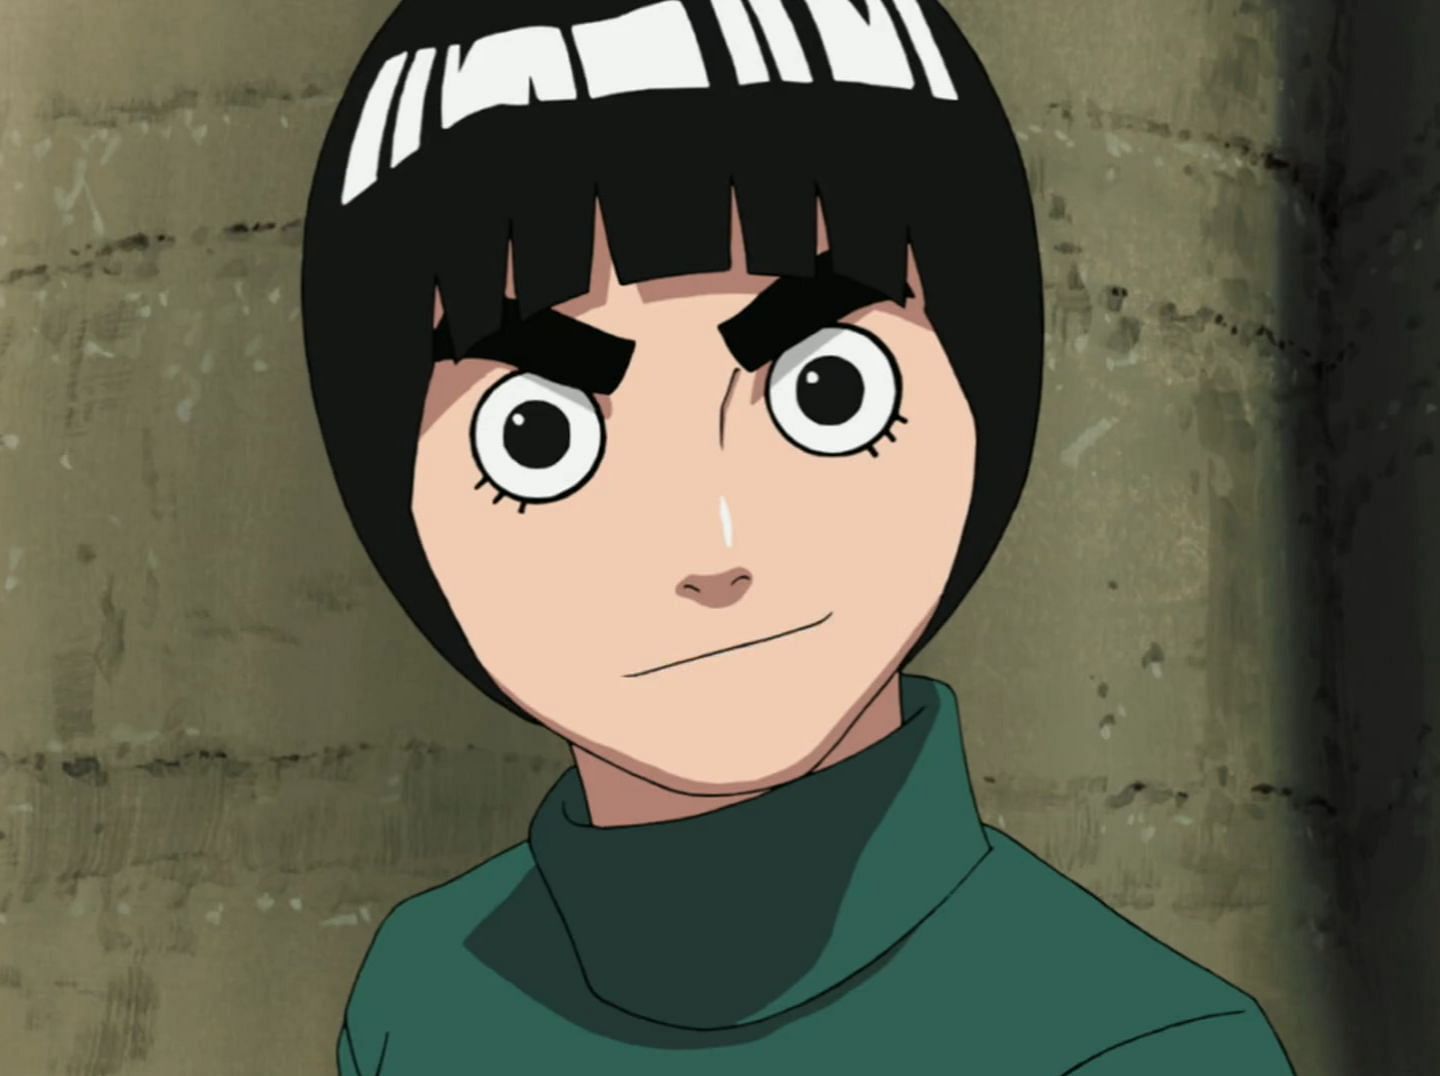 Rock Lee from the Naruto series (image via Pierrot)